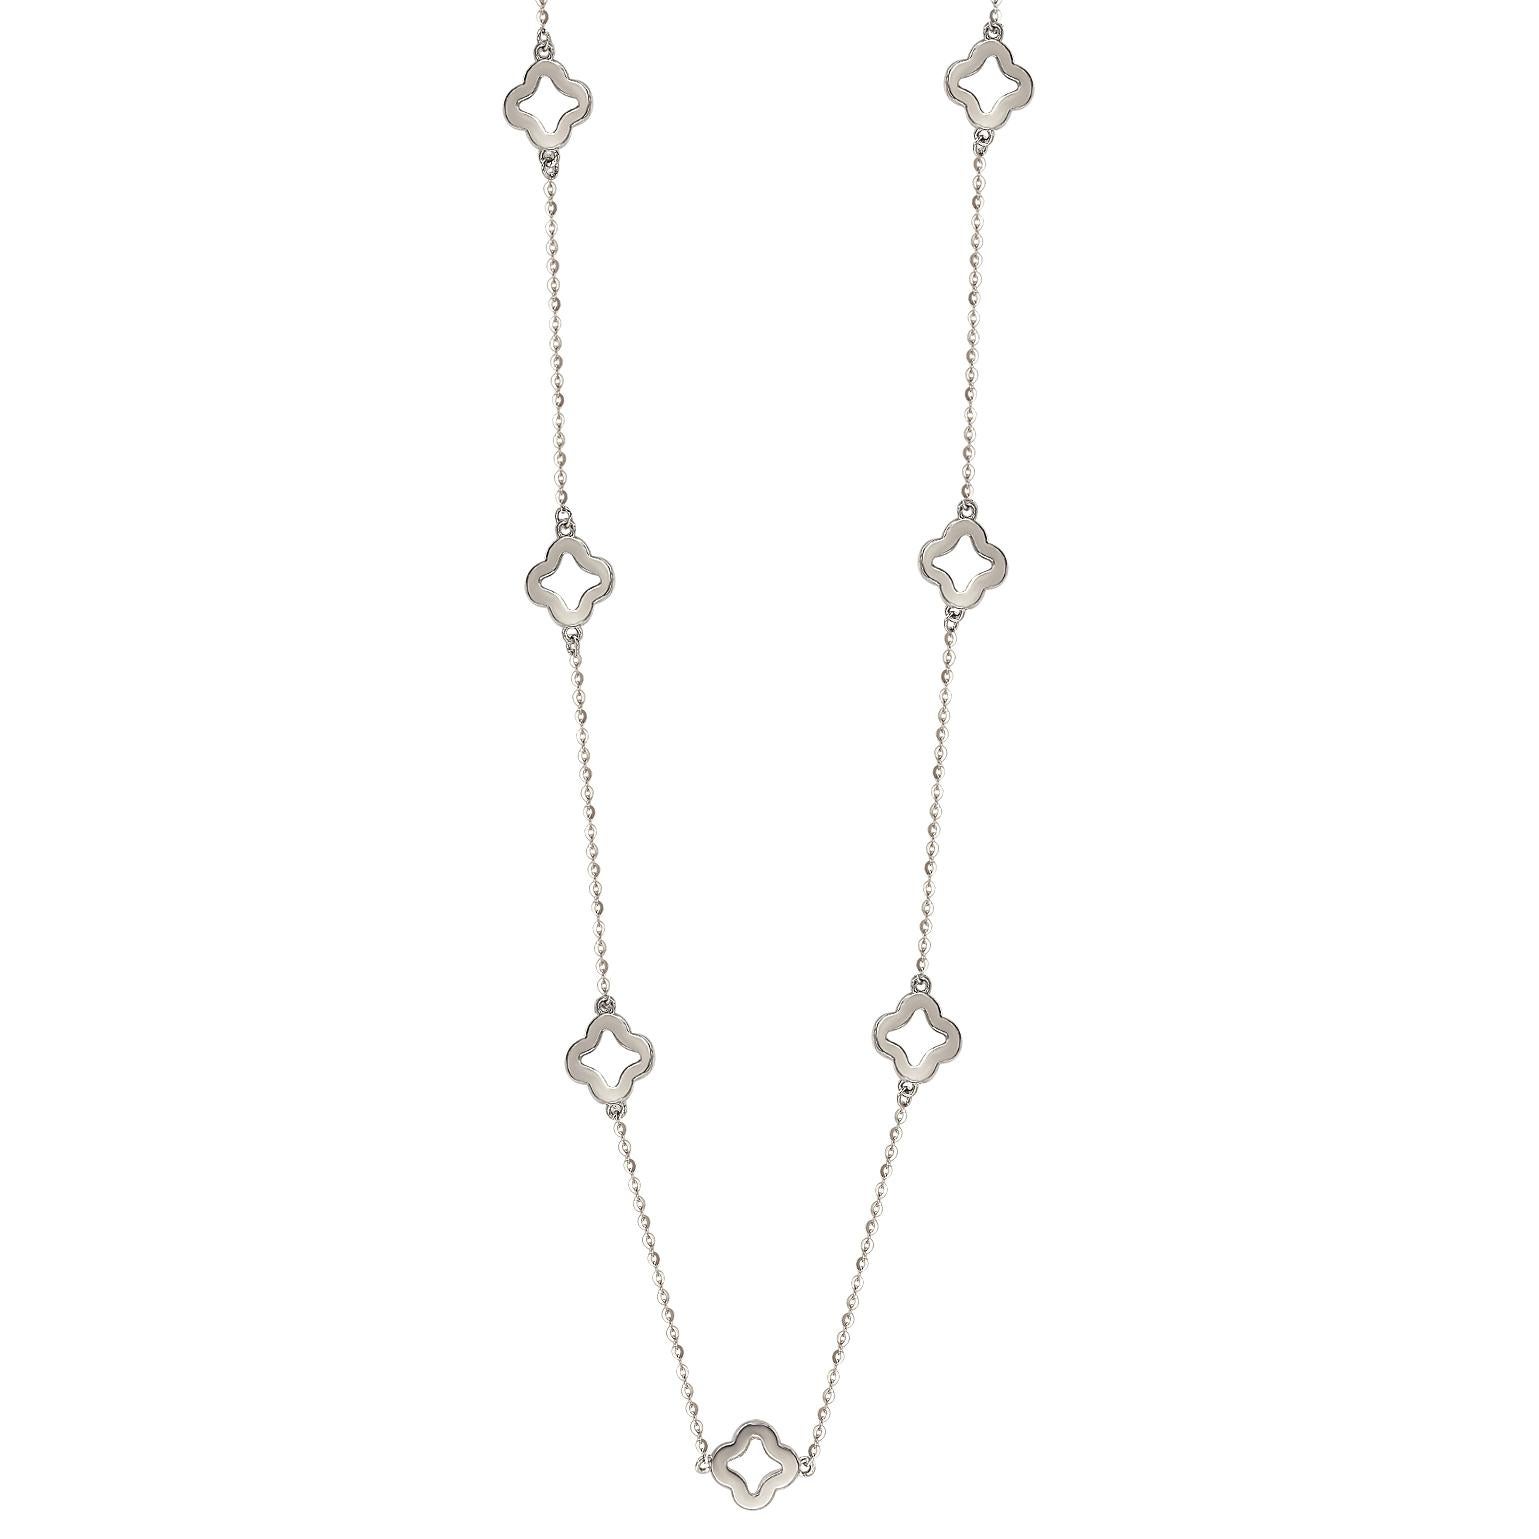 This unique Suzy Levian diamond open clover by the yard necklace displays round-cut diamonds on 14 karat white gold setting. This gorgeous necklace contains 126, 1 mm white round cut diamonds totaling 0.63 cttw. The necklace has 7 clovers, each